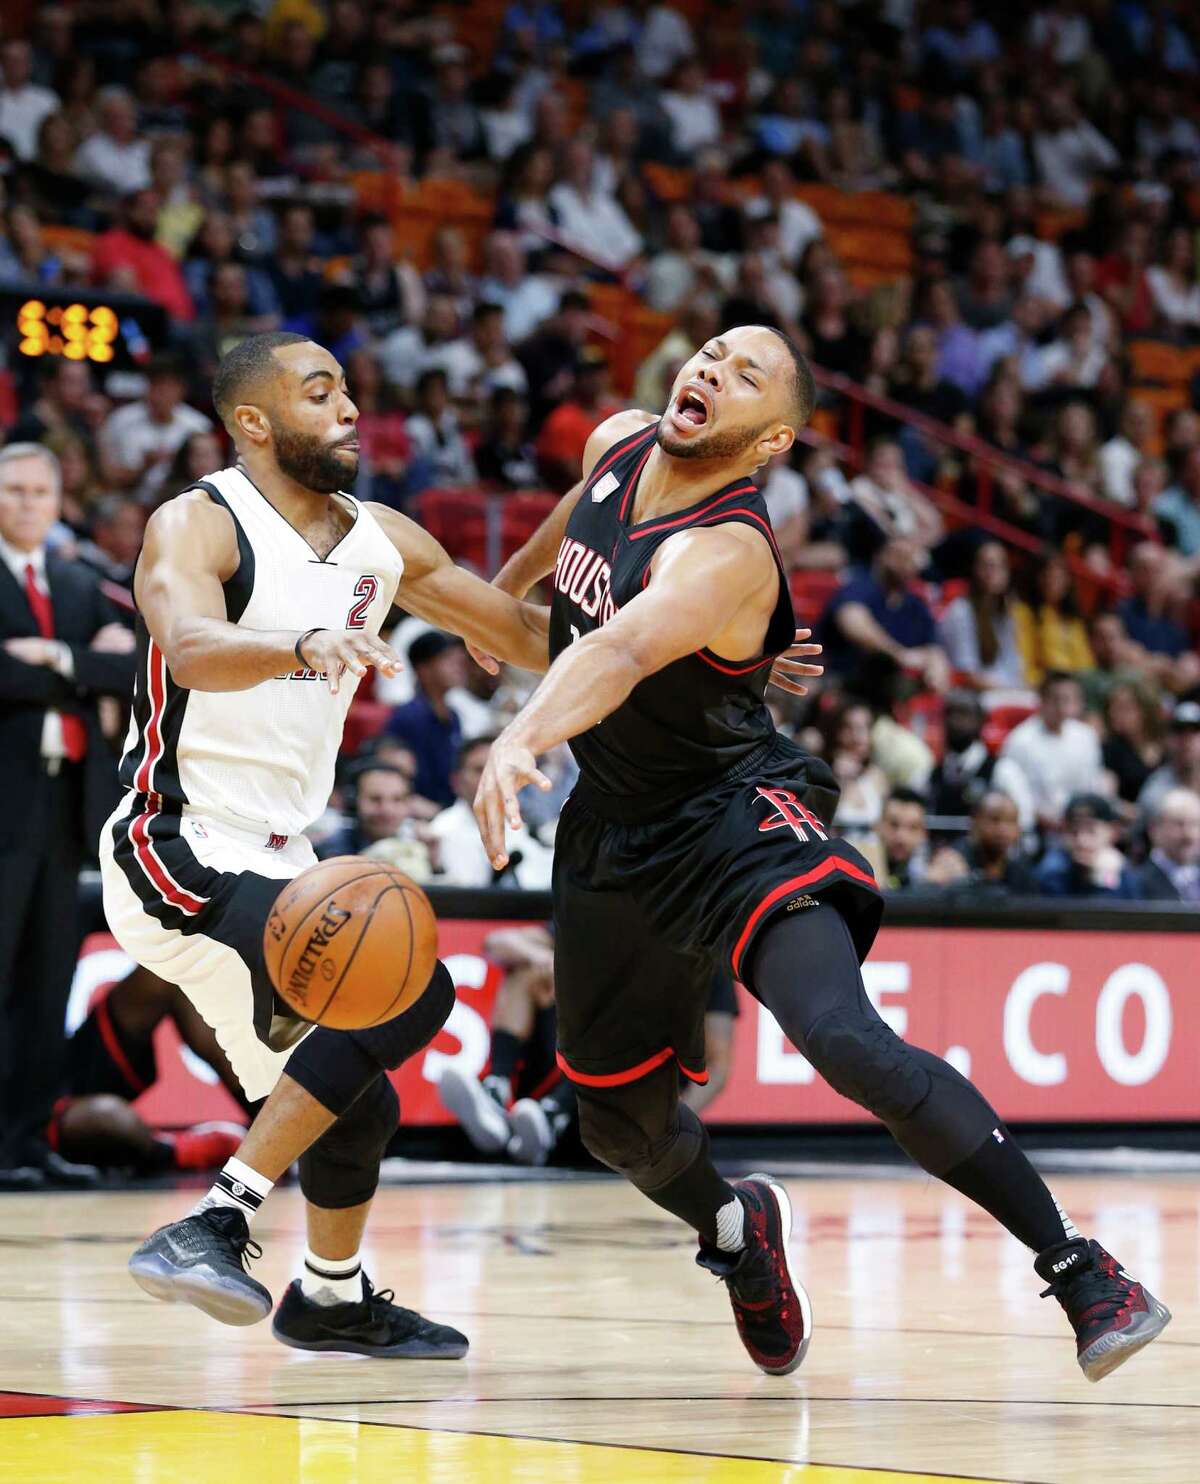 Houston Rockets guard Eric Gordon, left, loses control of the ball as he goes up for a shot against Miami Heat guard Wayne Ellington (2) during the first half of an NBA basketball game, Tuesday, Jan. 17, 2017, in Miami. (AP Photo/Wilfredo Lee)